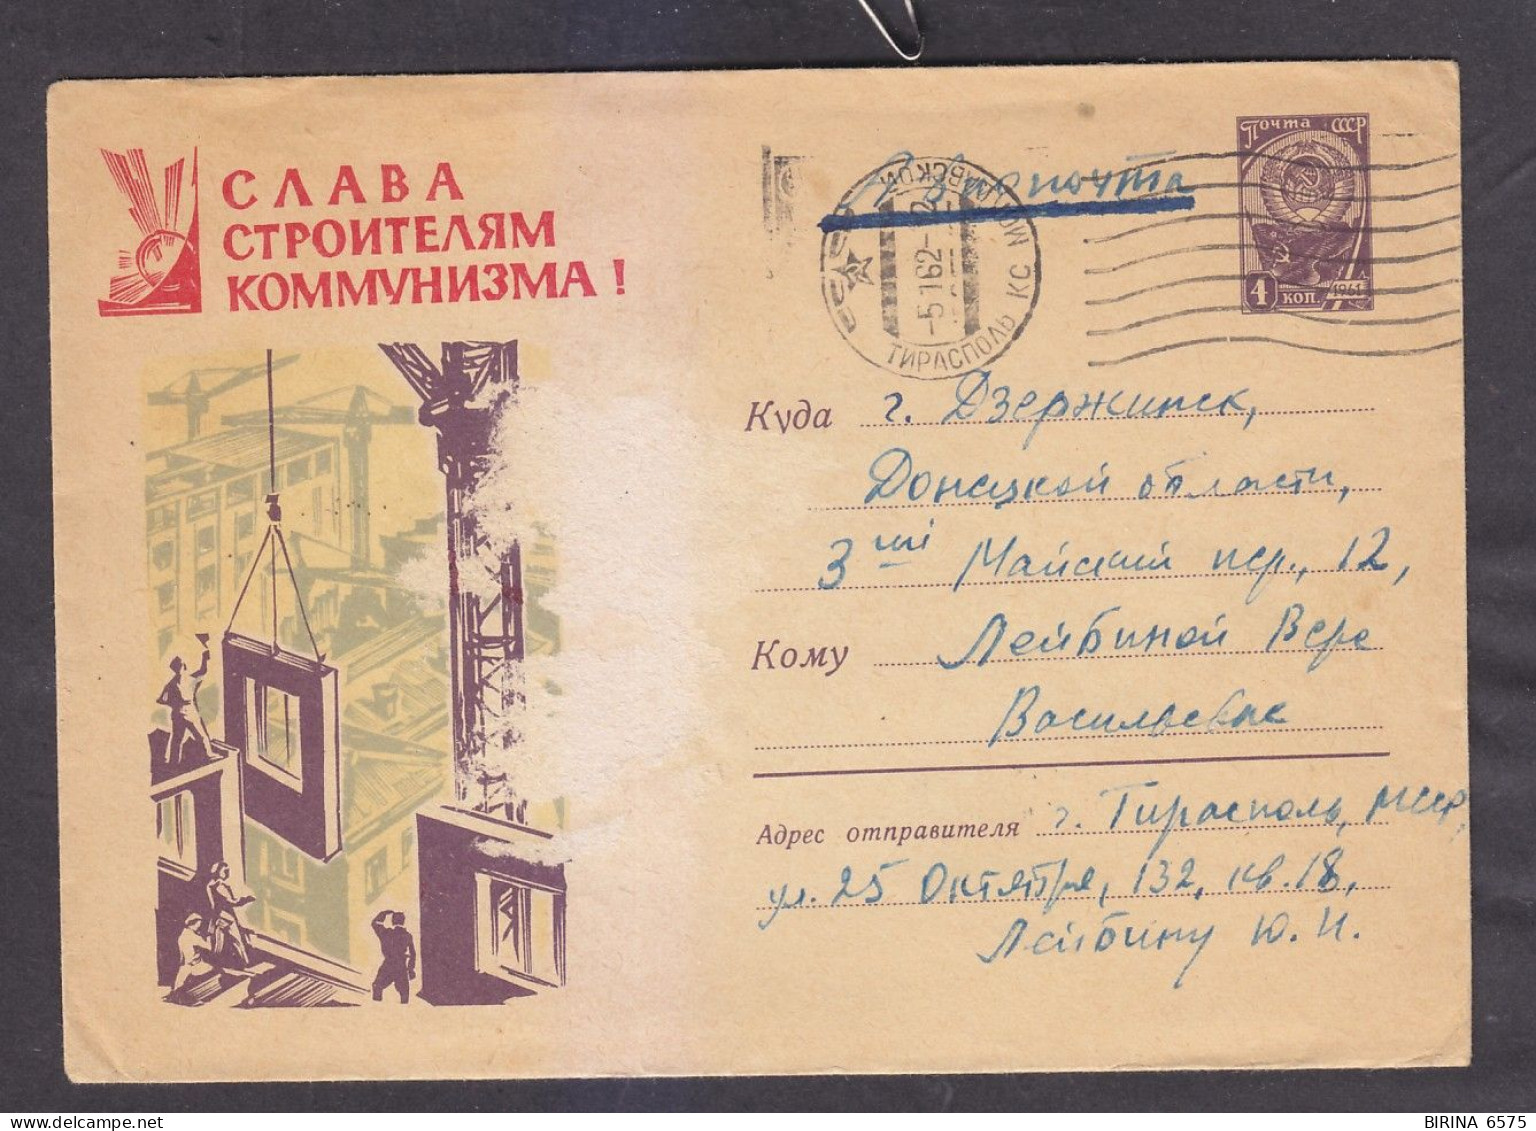 Envelope. The USSR. GLORY TO THE BUILDERS OF COMMUNISM!. Mail. 1962. - 8-44 - Covers & Documents